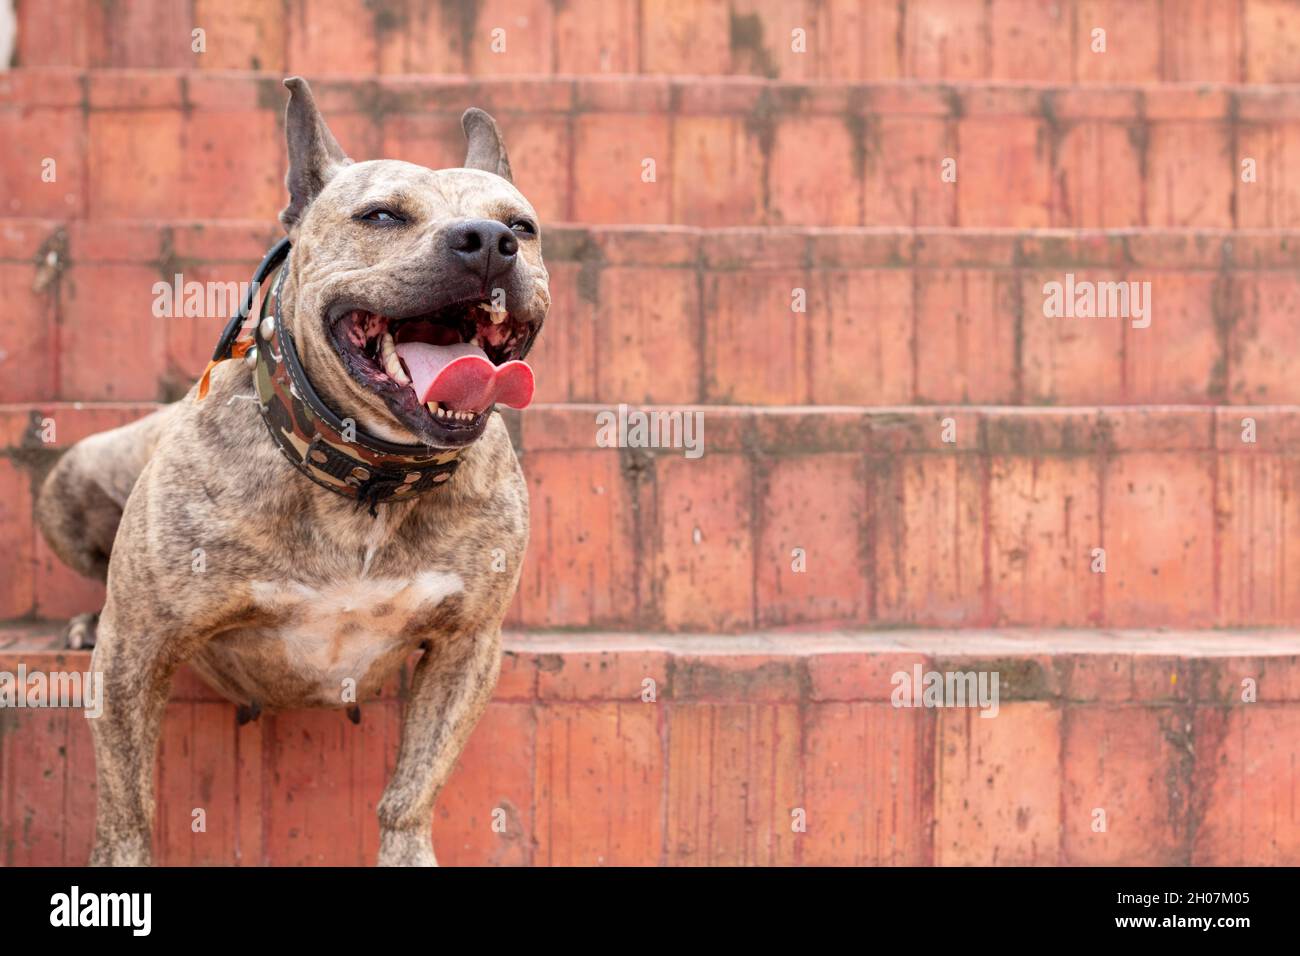 Beautiful female pitbull panting and resting on orange stairs. Breaking patterns. Dog smiling with tongue out. Stock Photo